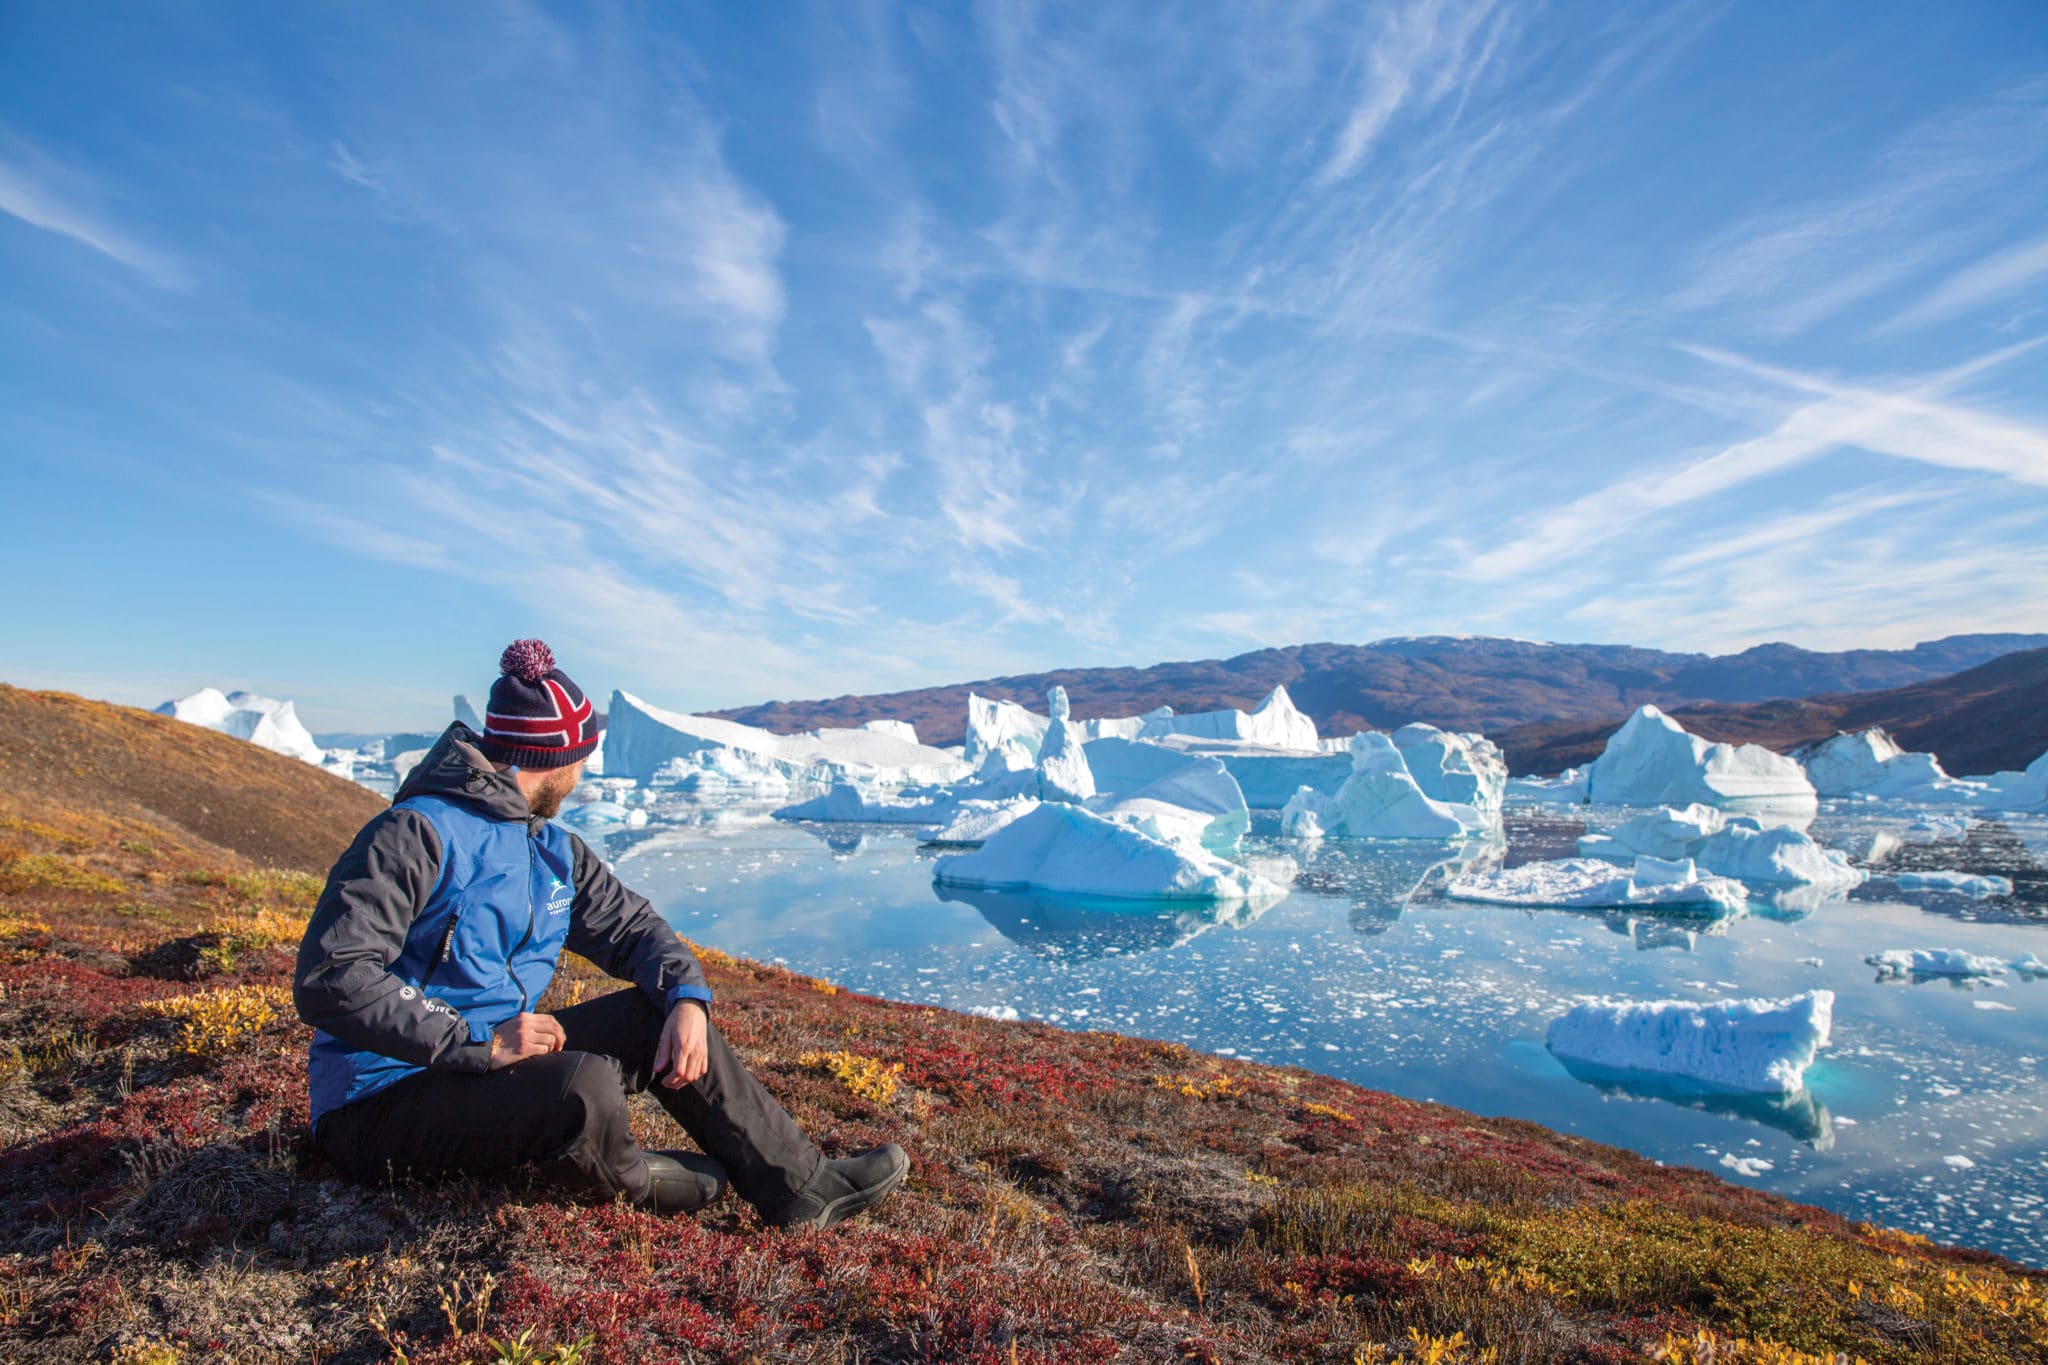 expedition cruises to greenland